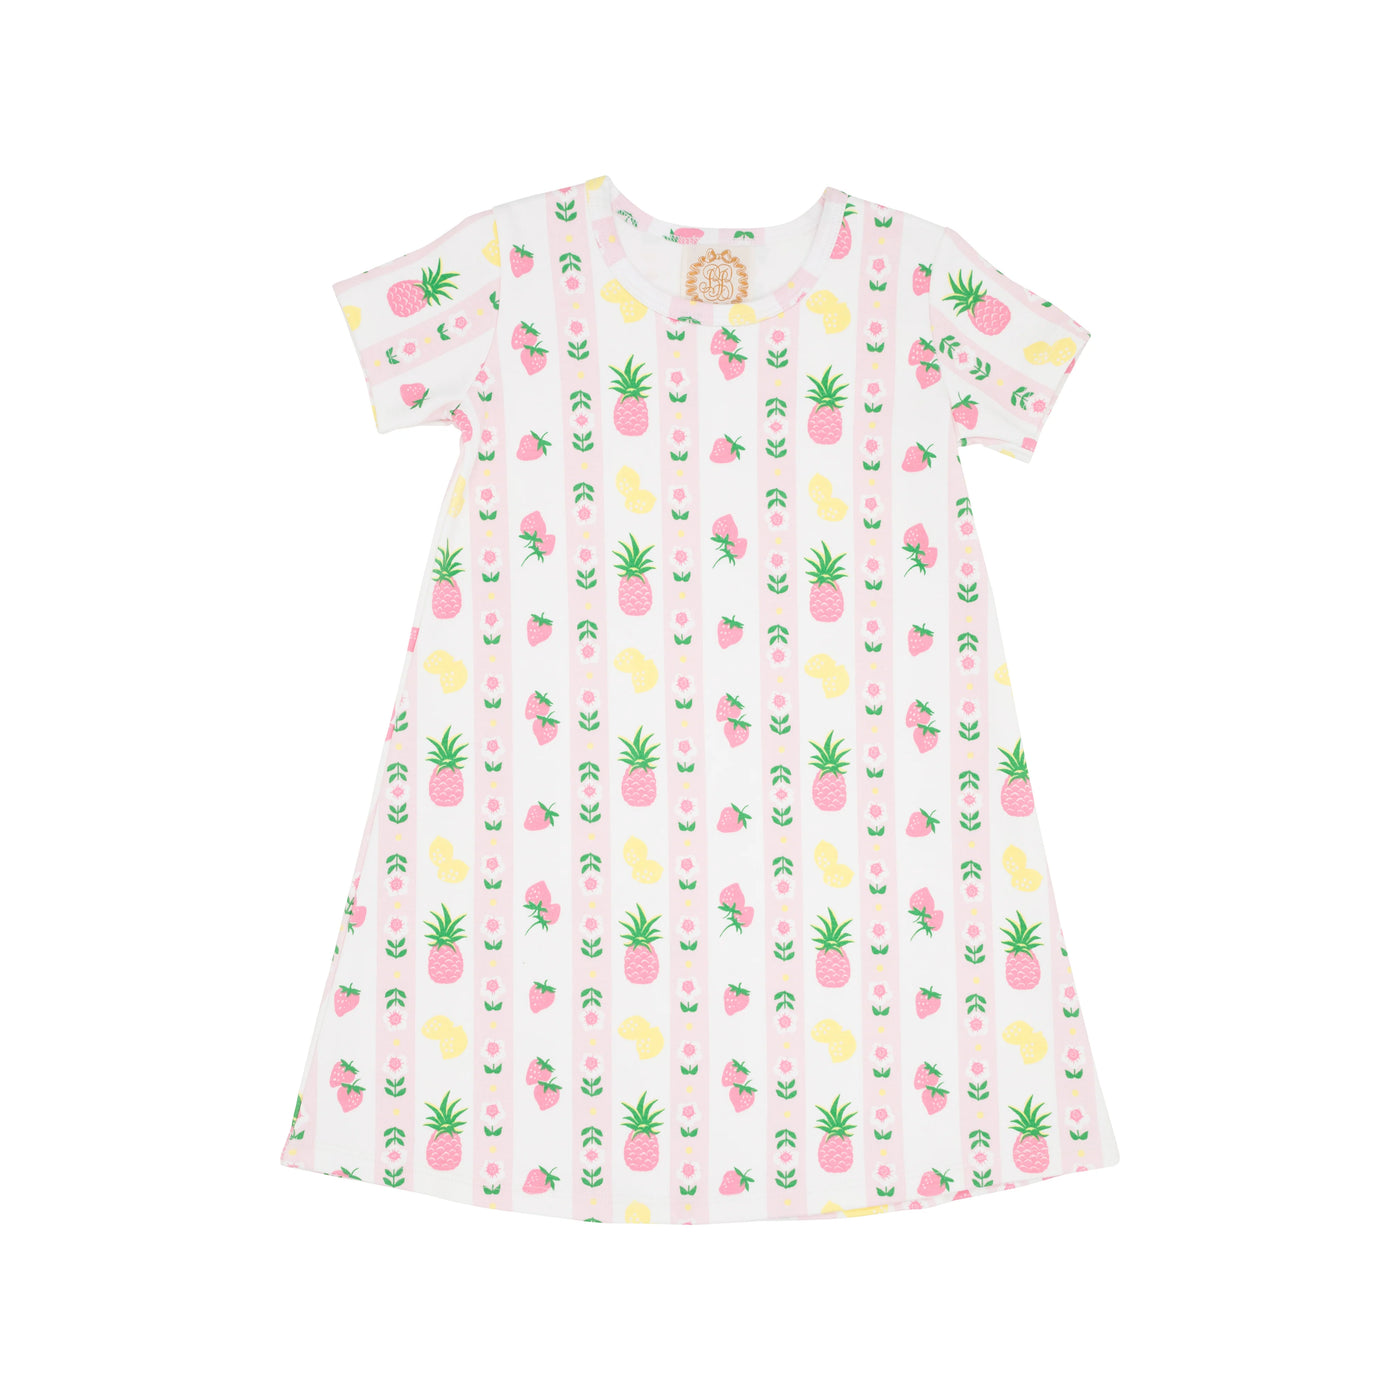 Polly Play Dress - Fruit Punch & Petals - Breckenridge Baby